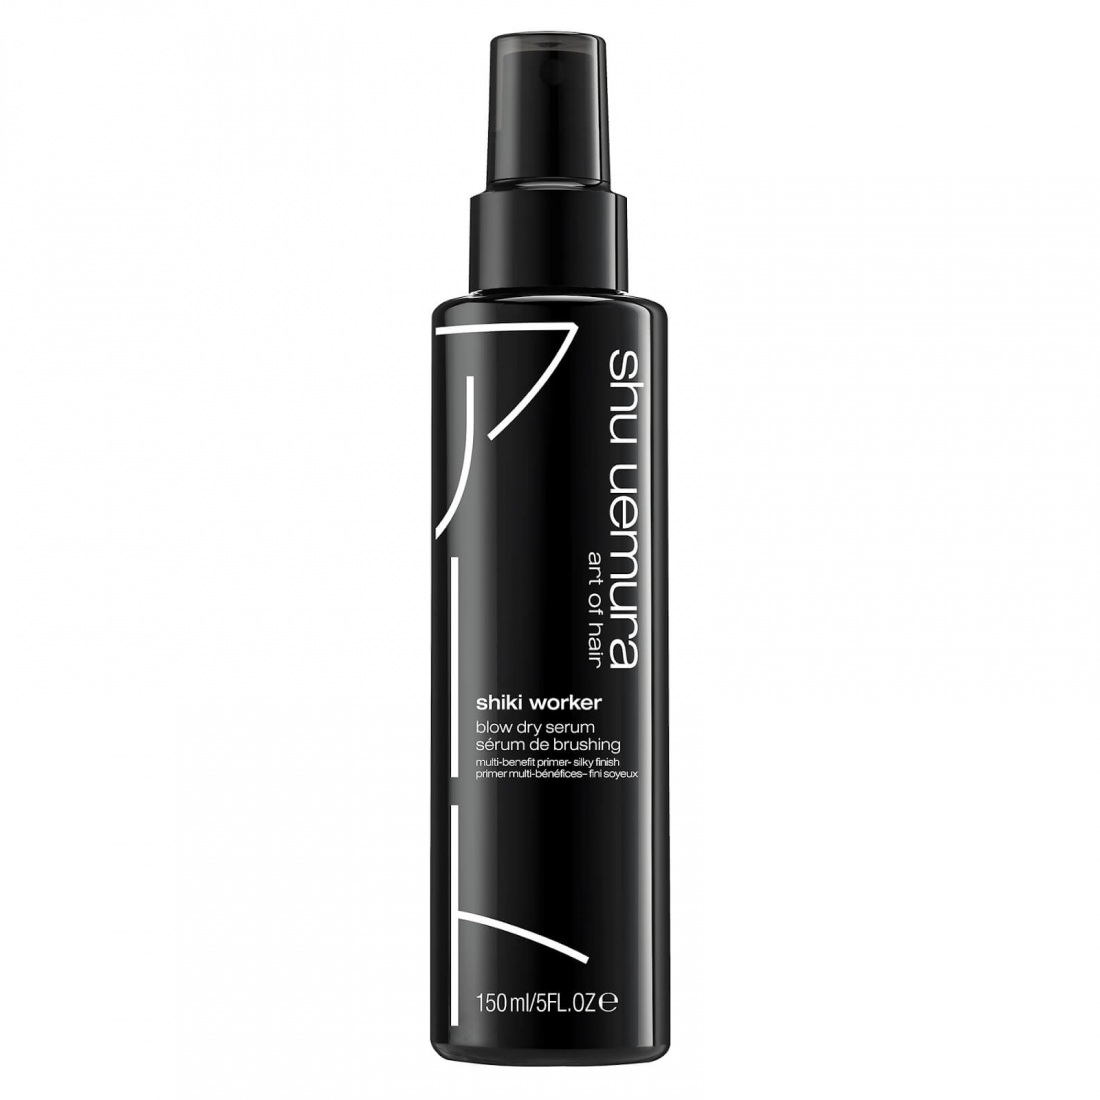 'The Art Of Styling Shiki Worker Blow Dry' Hair Primer - 150 ml